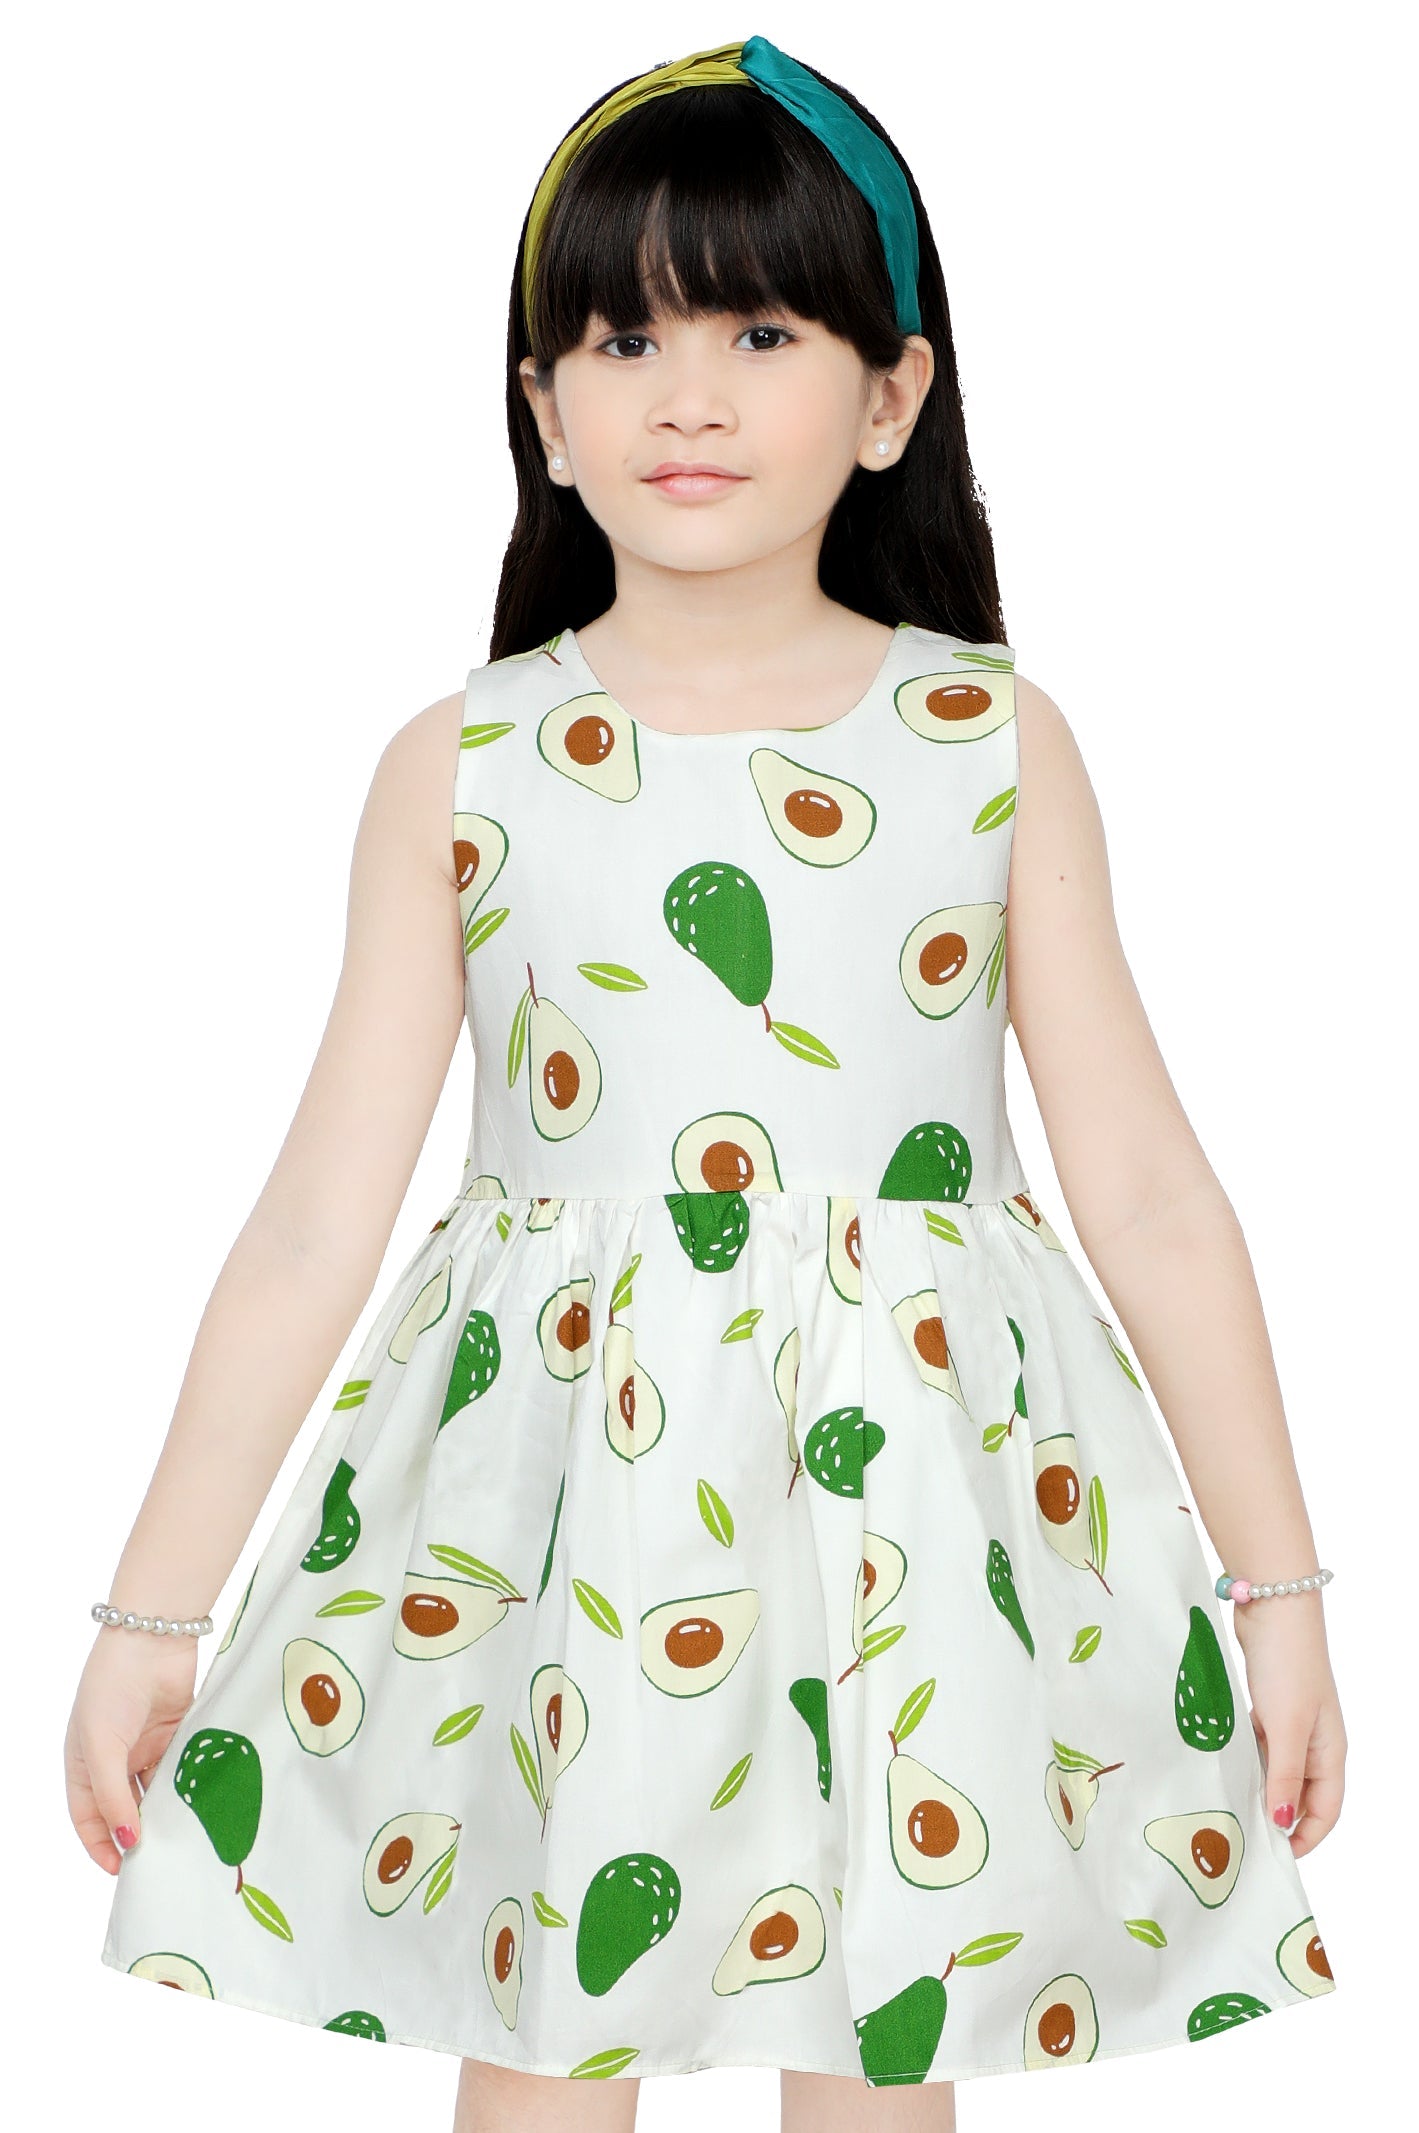 Girls Frock in White SKU: KGL-0338-WHITE - Diners